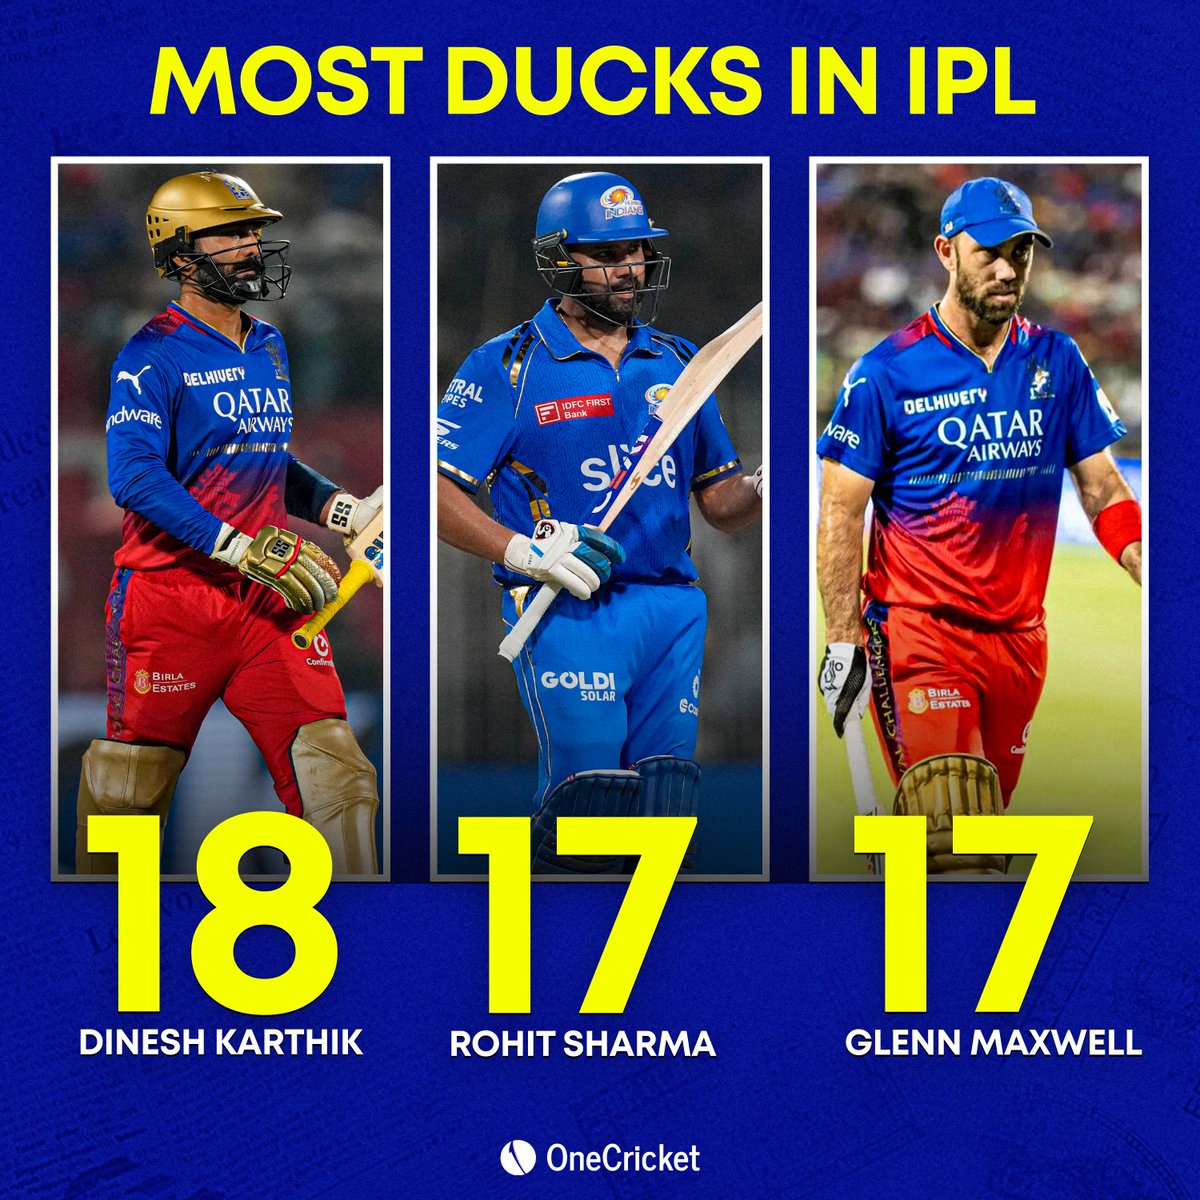 Dinesh Karthik has once again outdone Rohit Sharma by registering his 18th duck in the IPL 👀 #IPL2024 #RCBvsDC